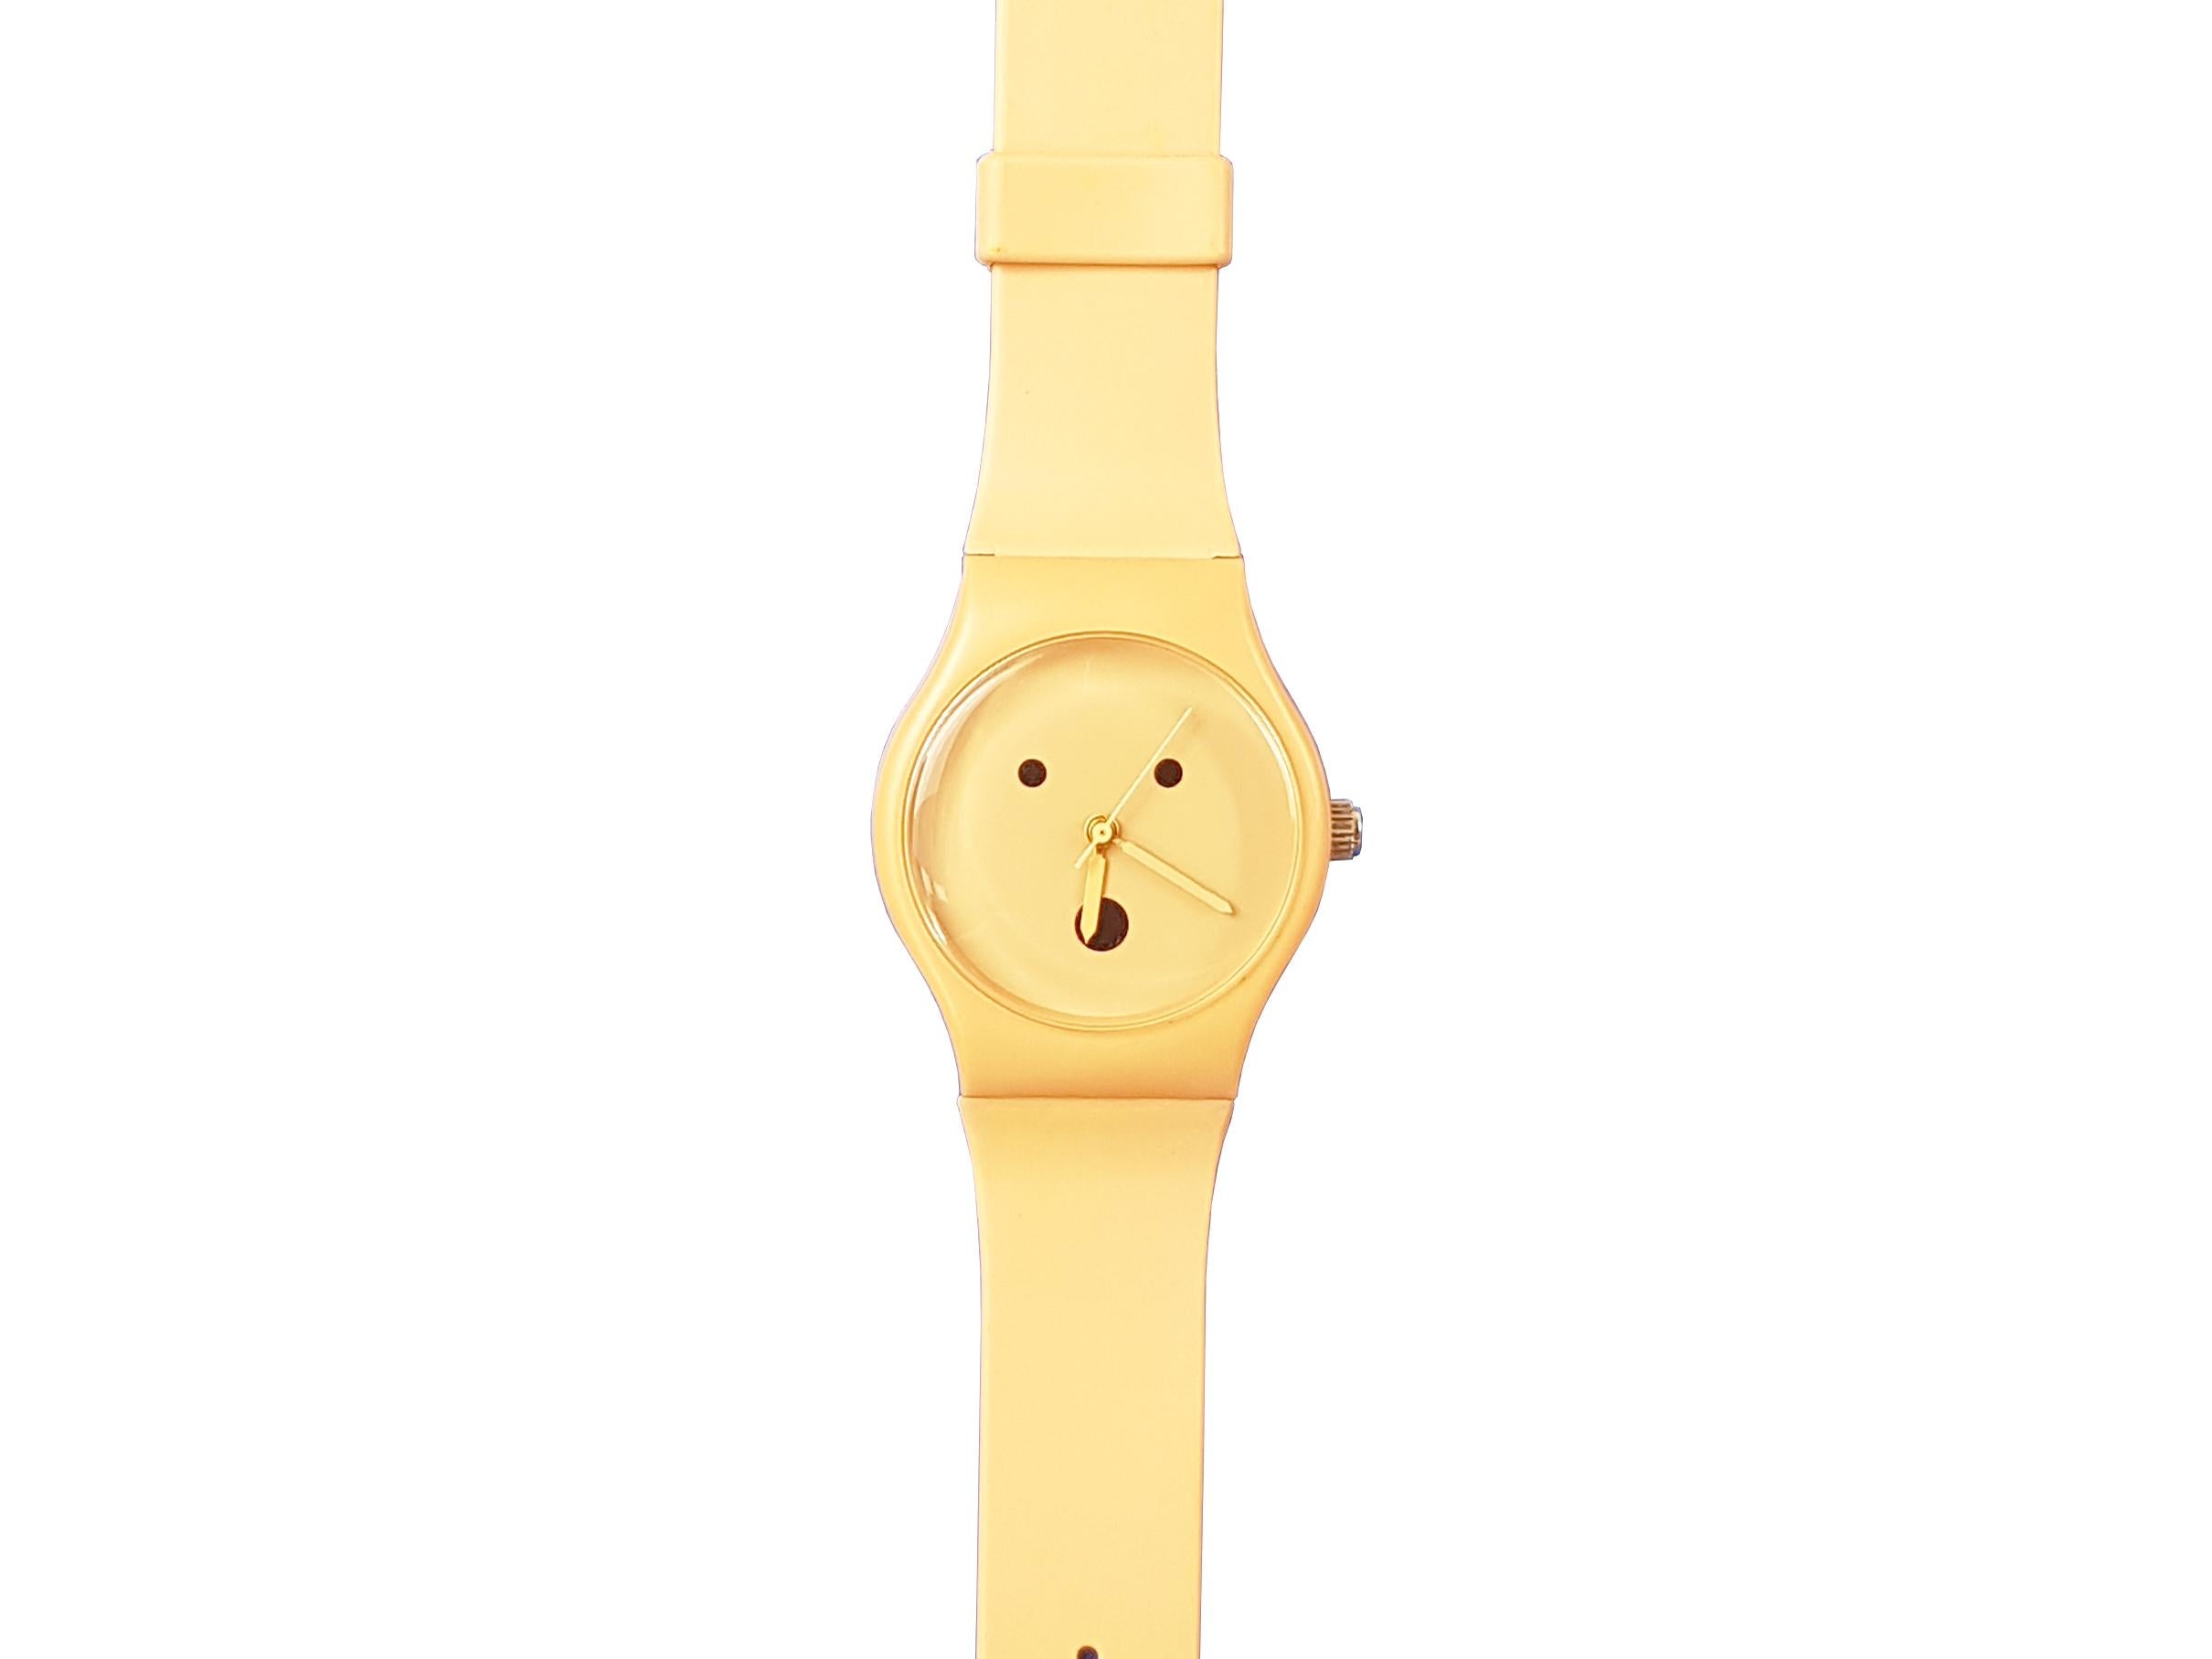 Wrist watch designed by Alessadro Mendini for Museo Alchimia, '90s. This manual wind watch was a prototype for the Swatch, a well-known company for which Mendini designed several watches in the '90s.
This watch is made of old pink rubber and